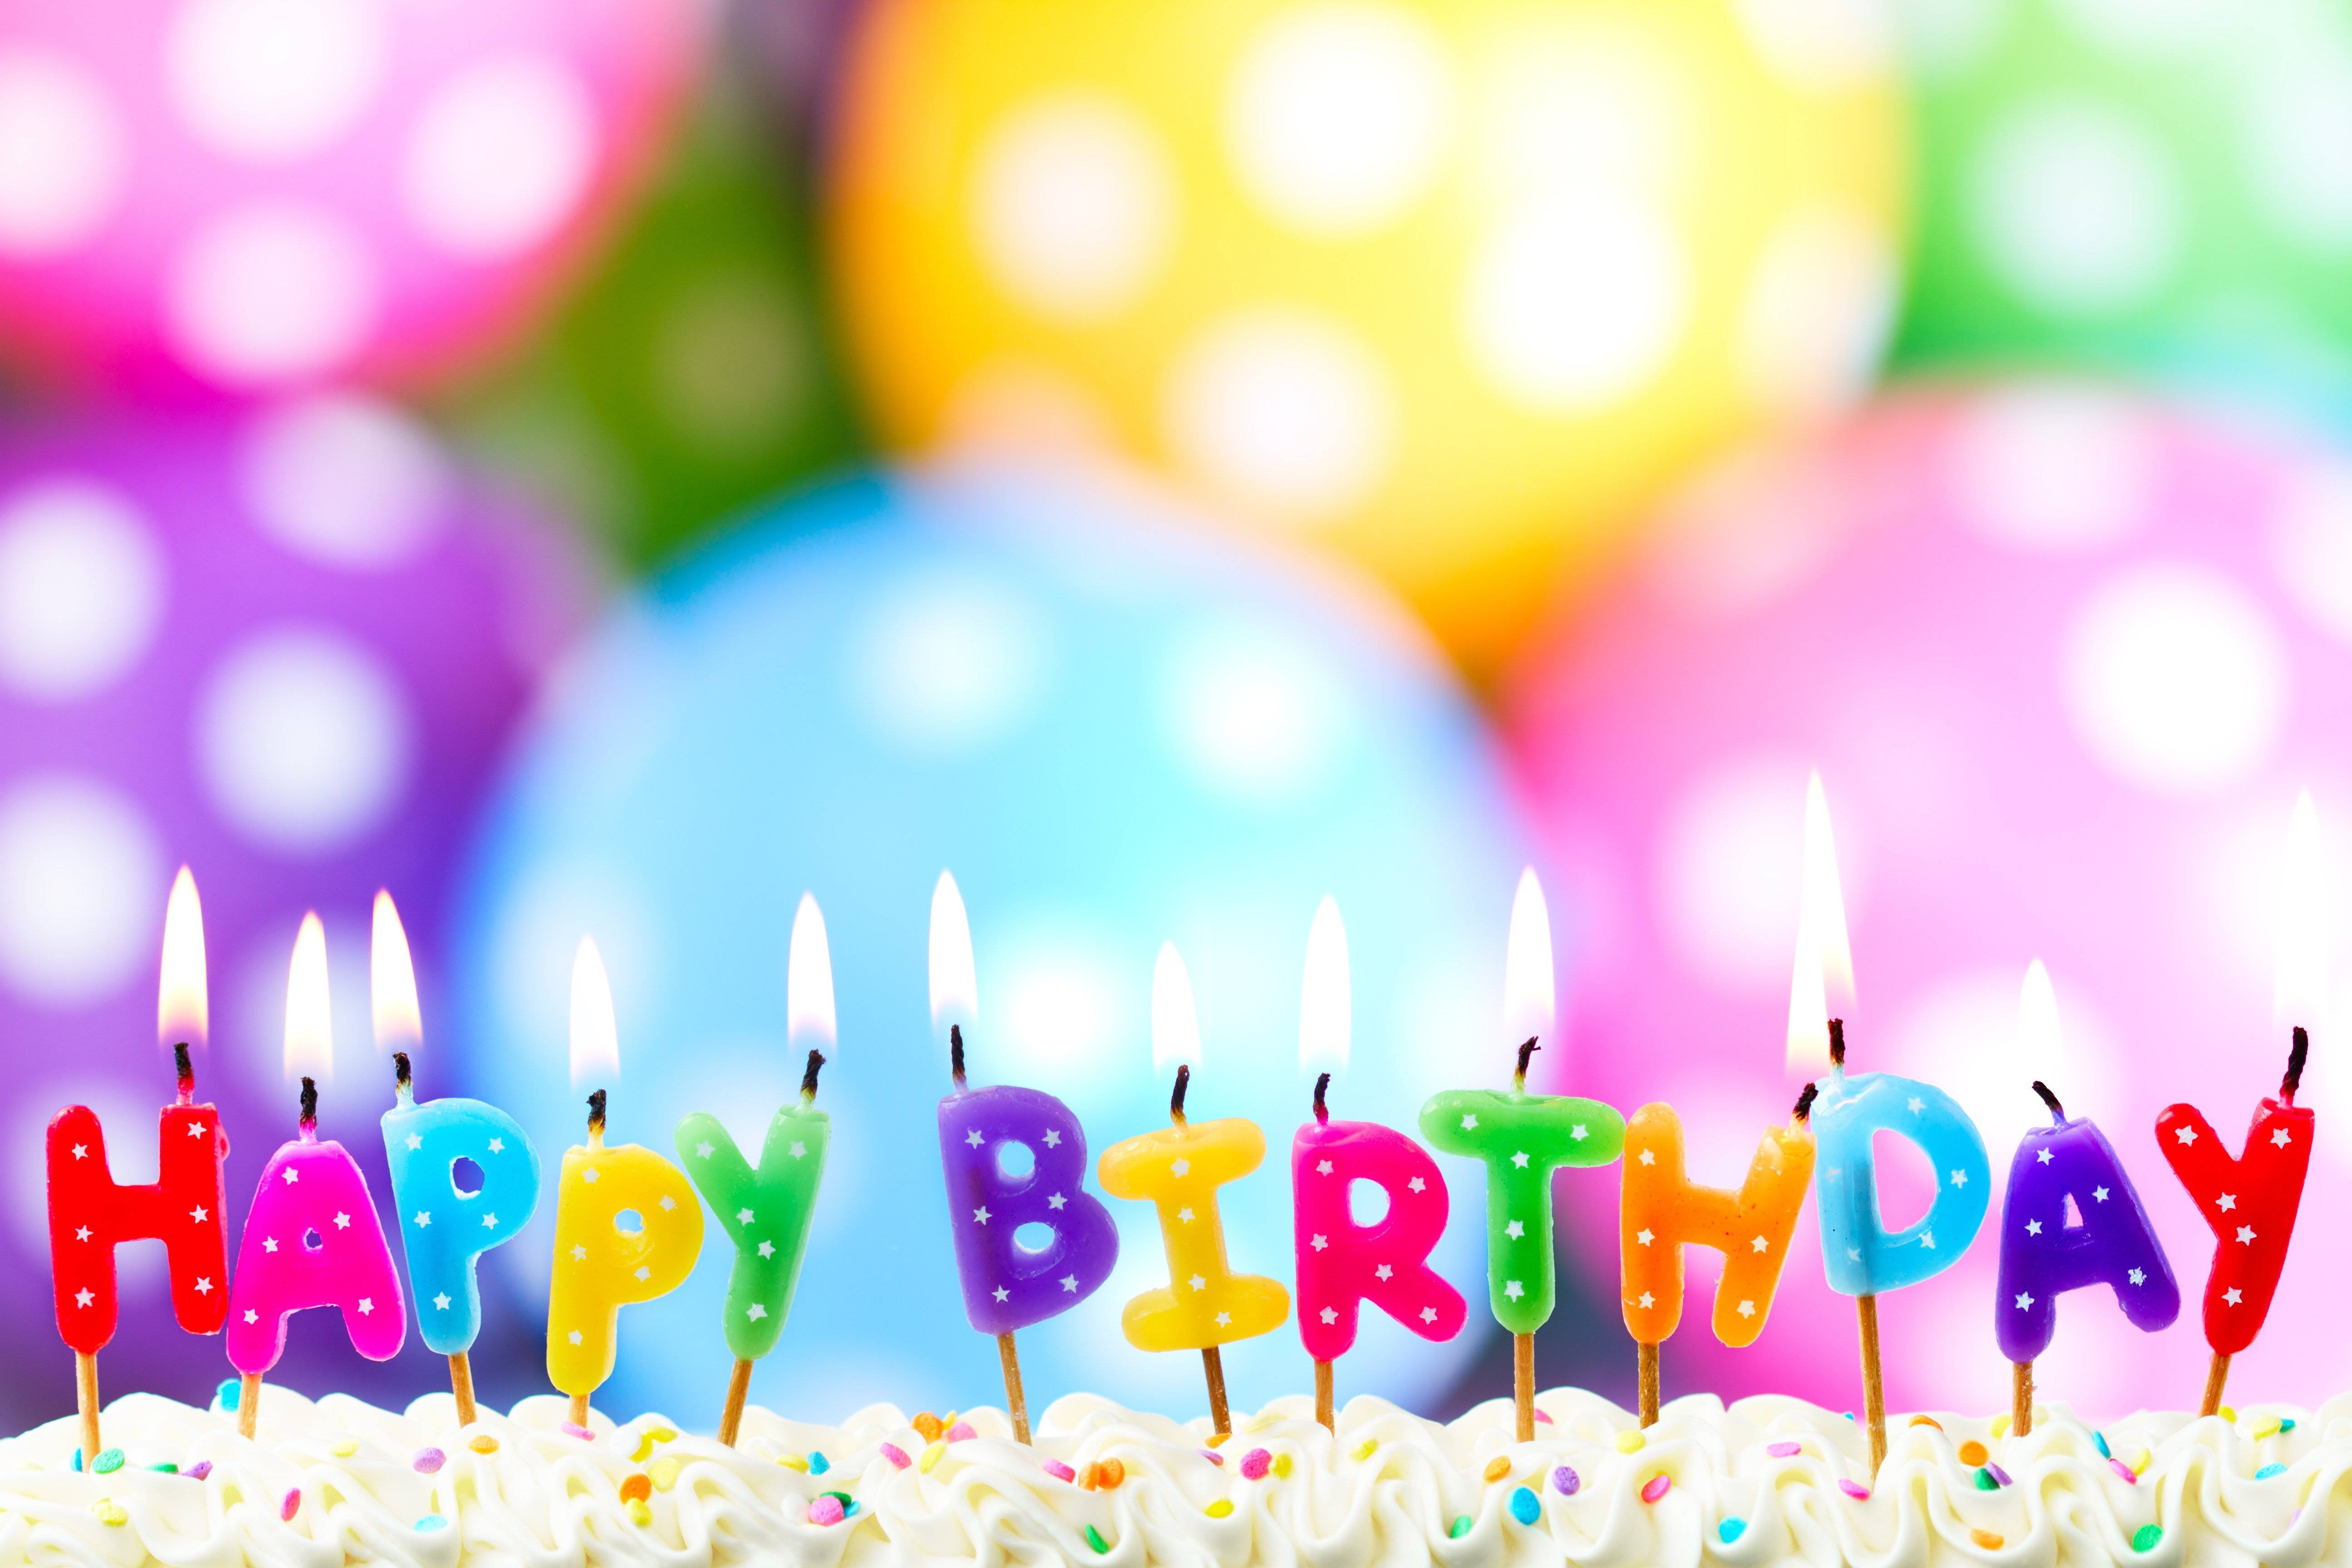 Birthday Burning Candle Download Backgrounds for Powerpoint Templates